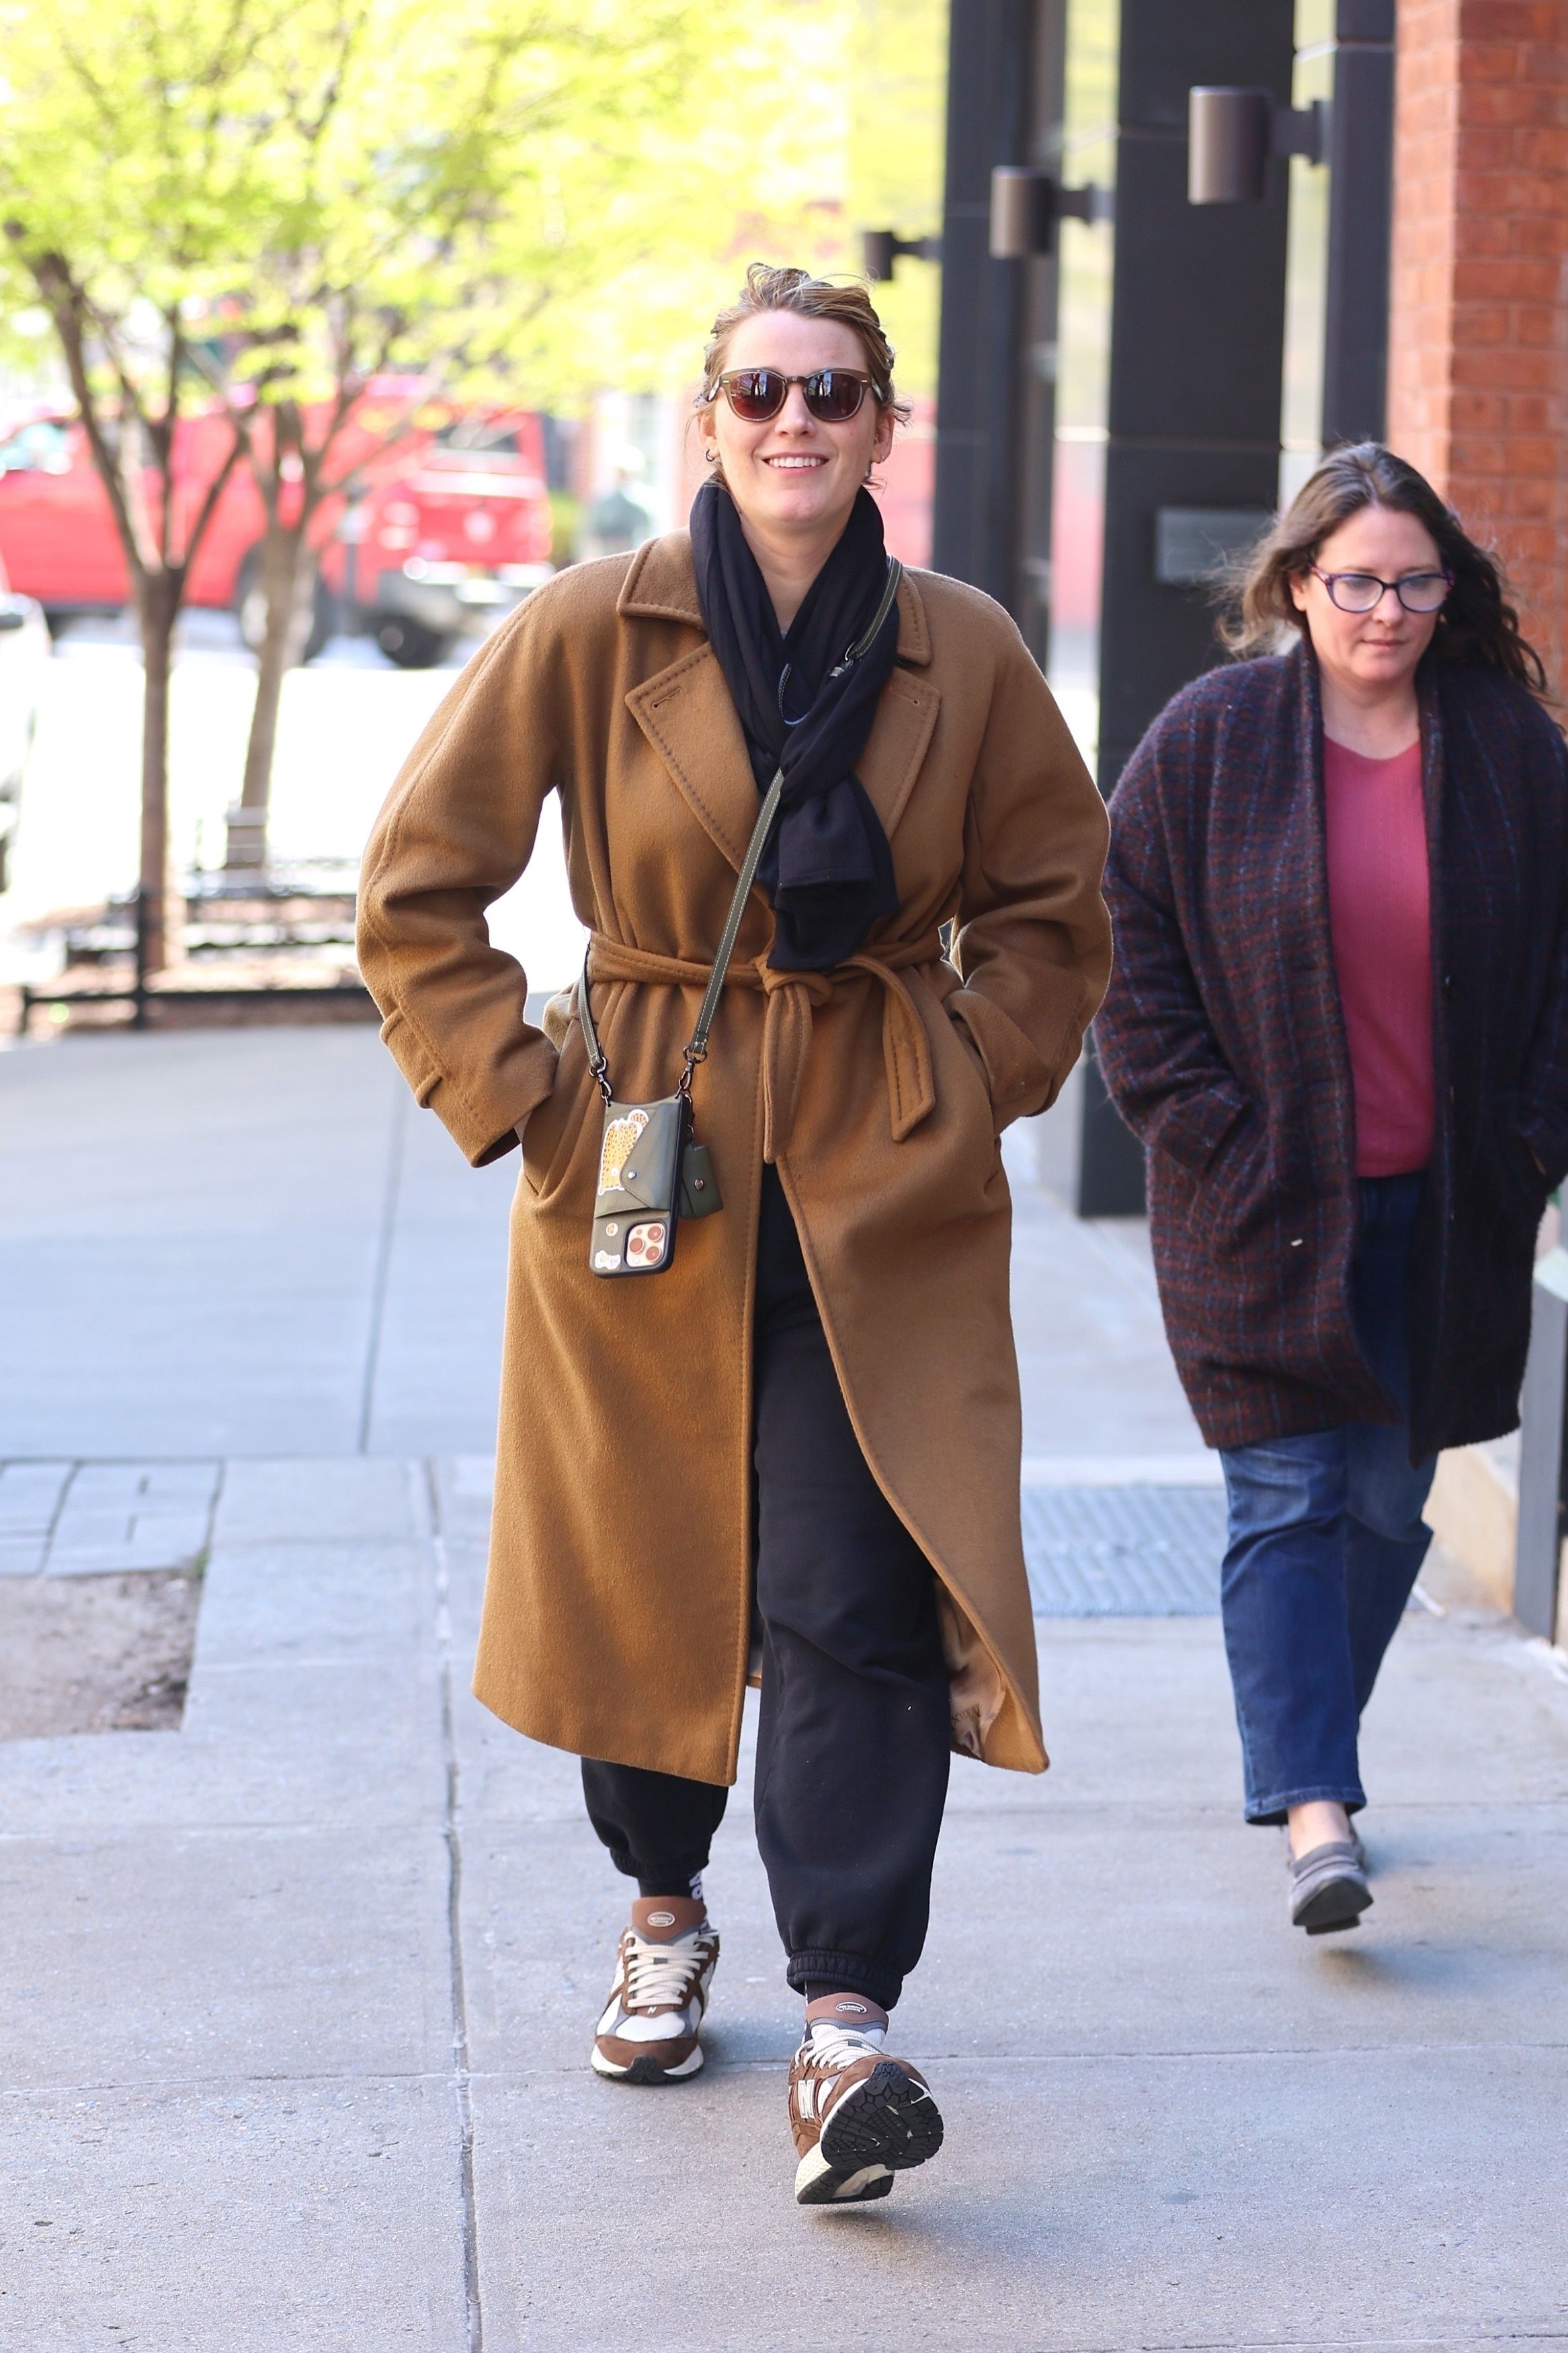 Blake Lively's Casual Off-Duty Look Involves a Wrap Coat and